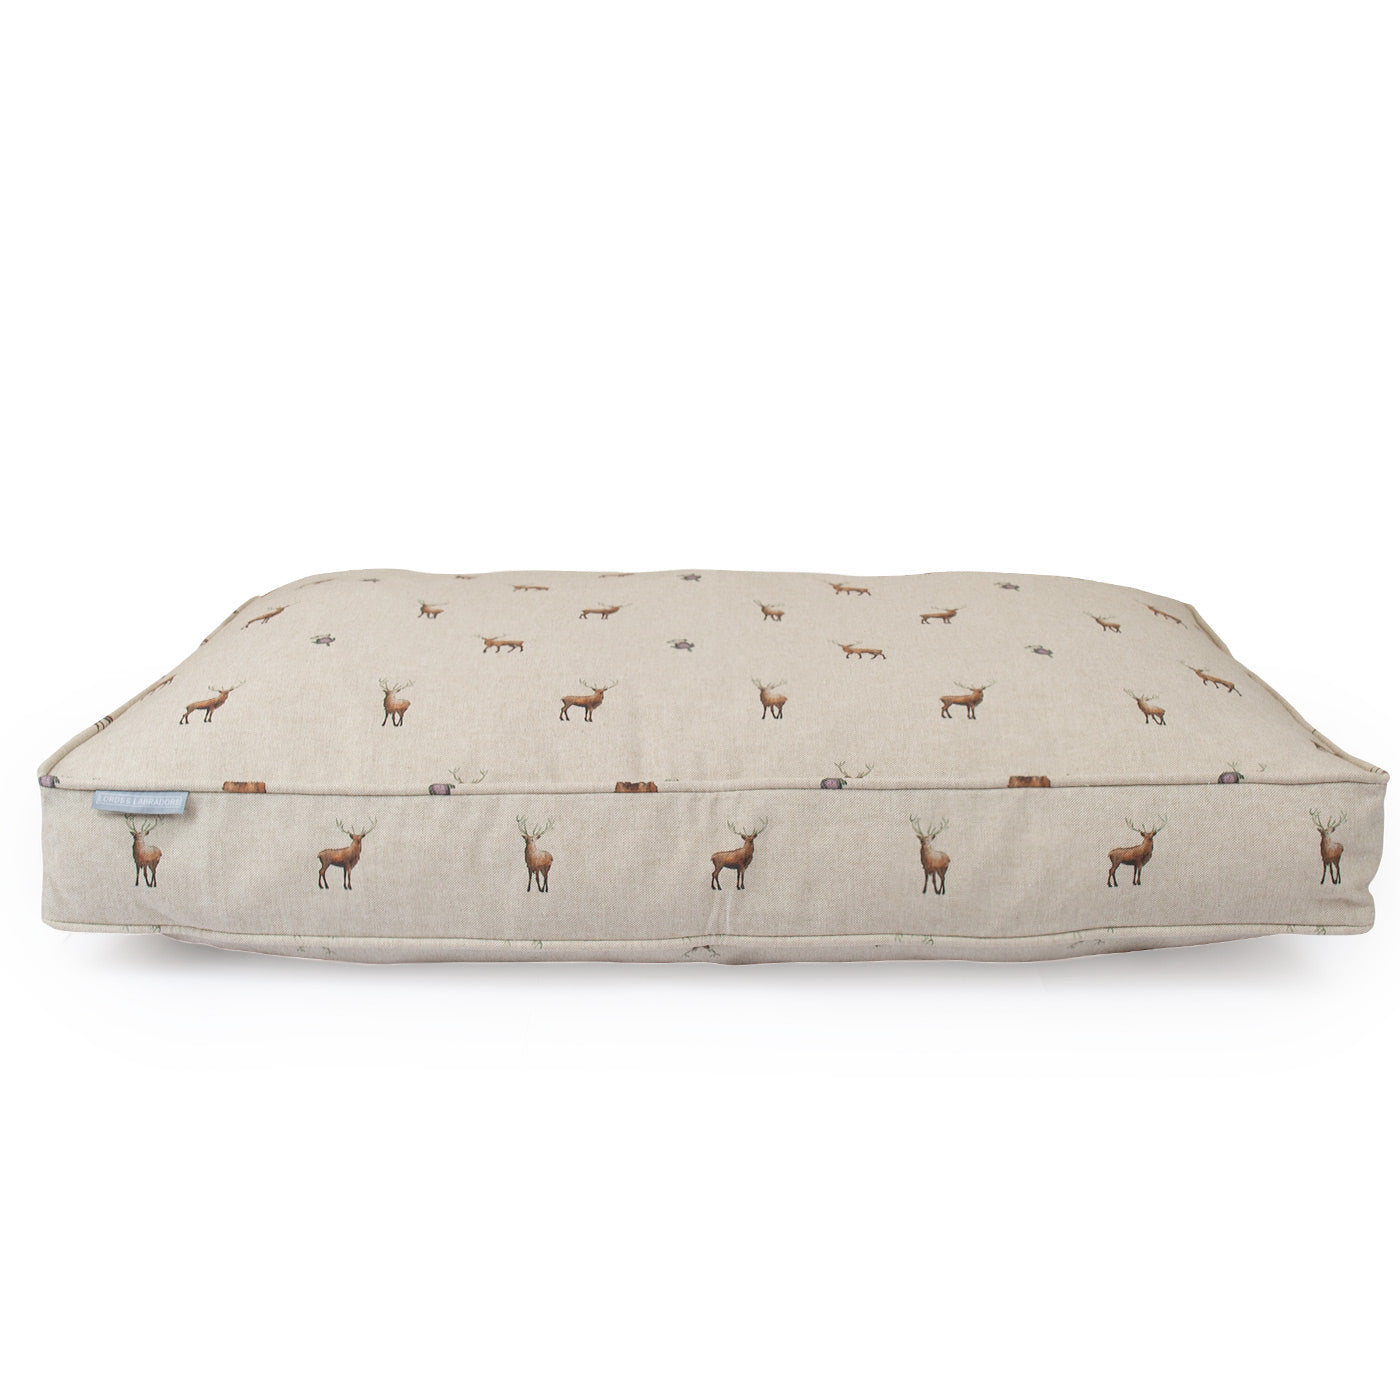 Luxury Woodland Dog Cushion, in Stag. Available For Pet Personalization, Handmade Here at Lords & Labradors US! Order The Perfect Pet Cushion Today For The Ultimate Burrow!